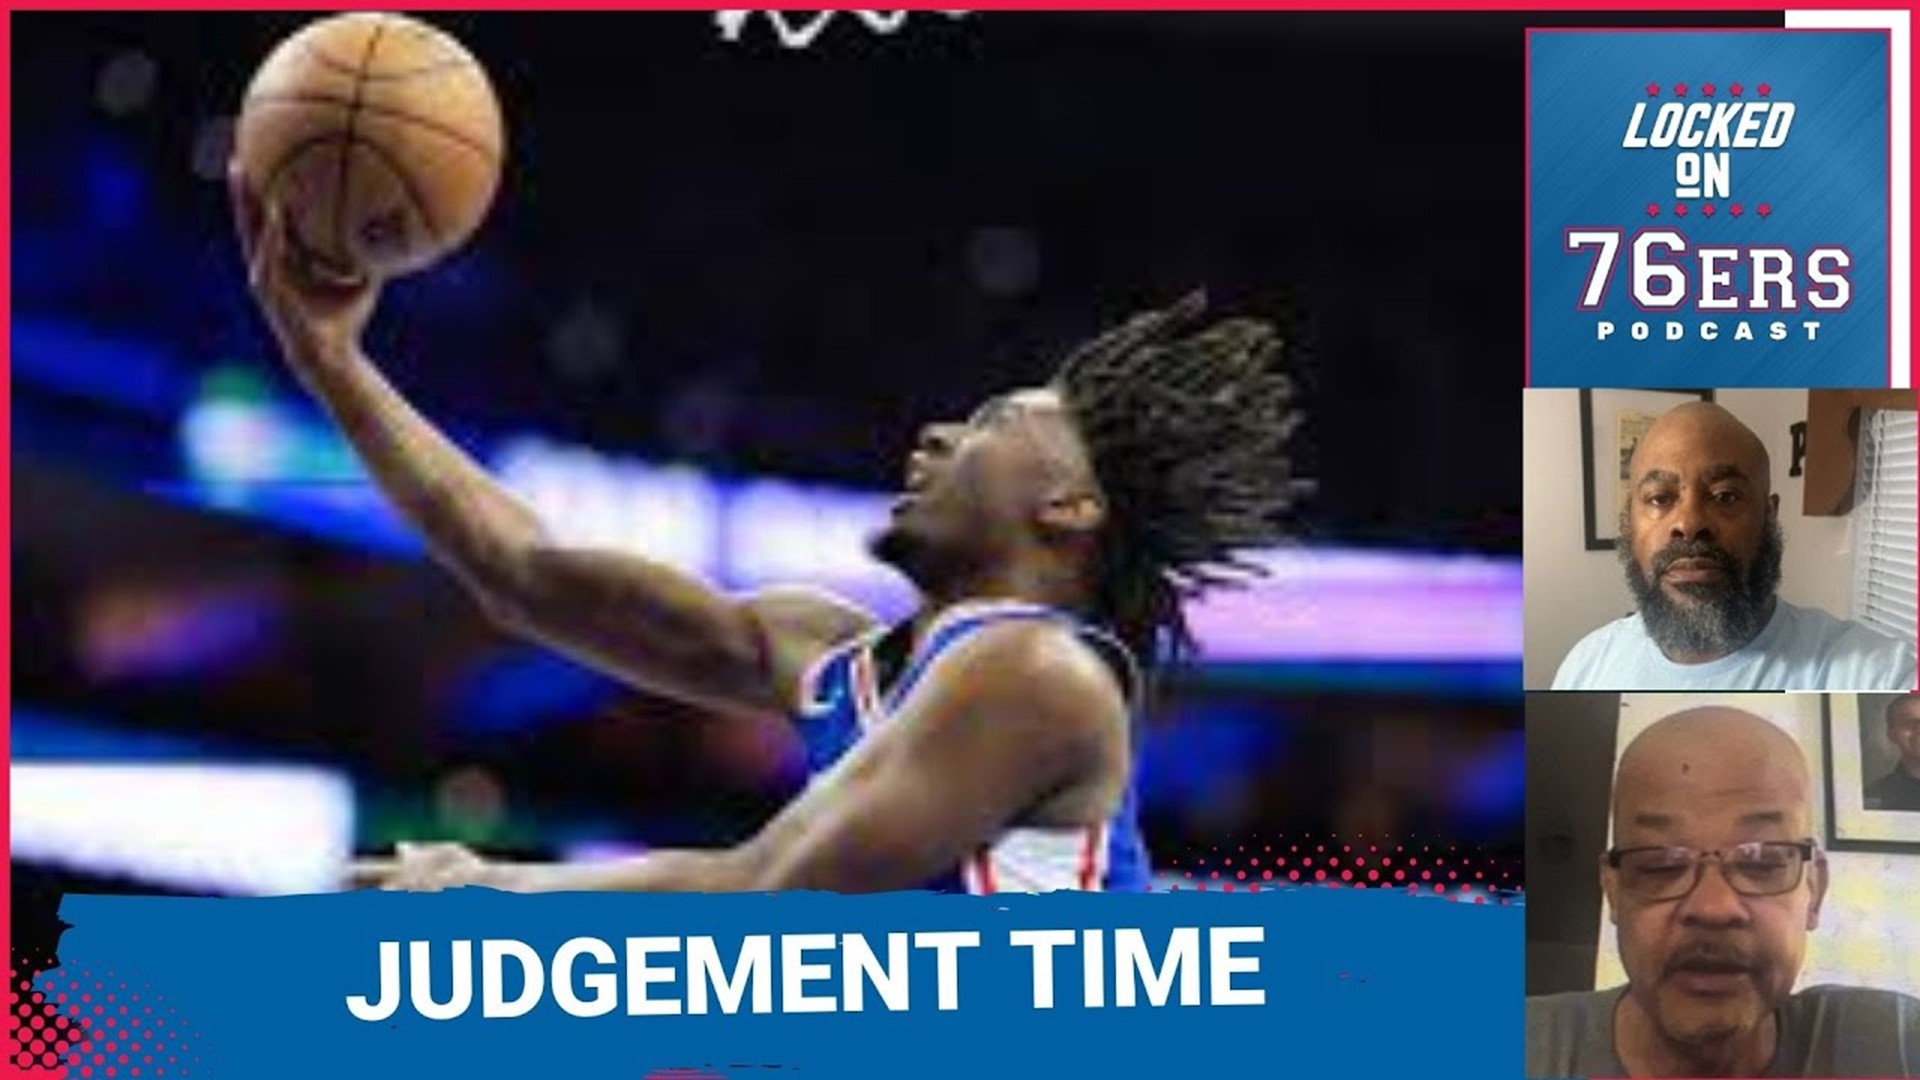 Judgement trip for Sixers. They're bracing for games at Suns, Lakers, Clippers and Kings